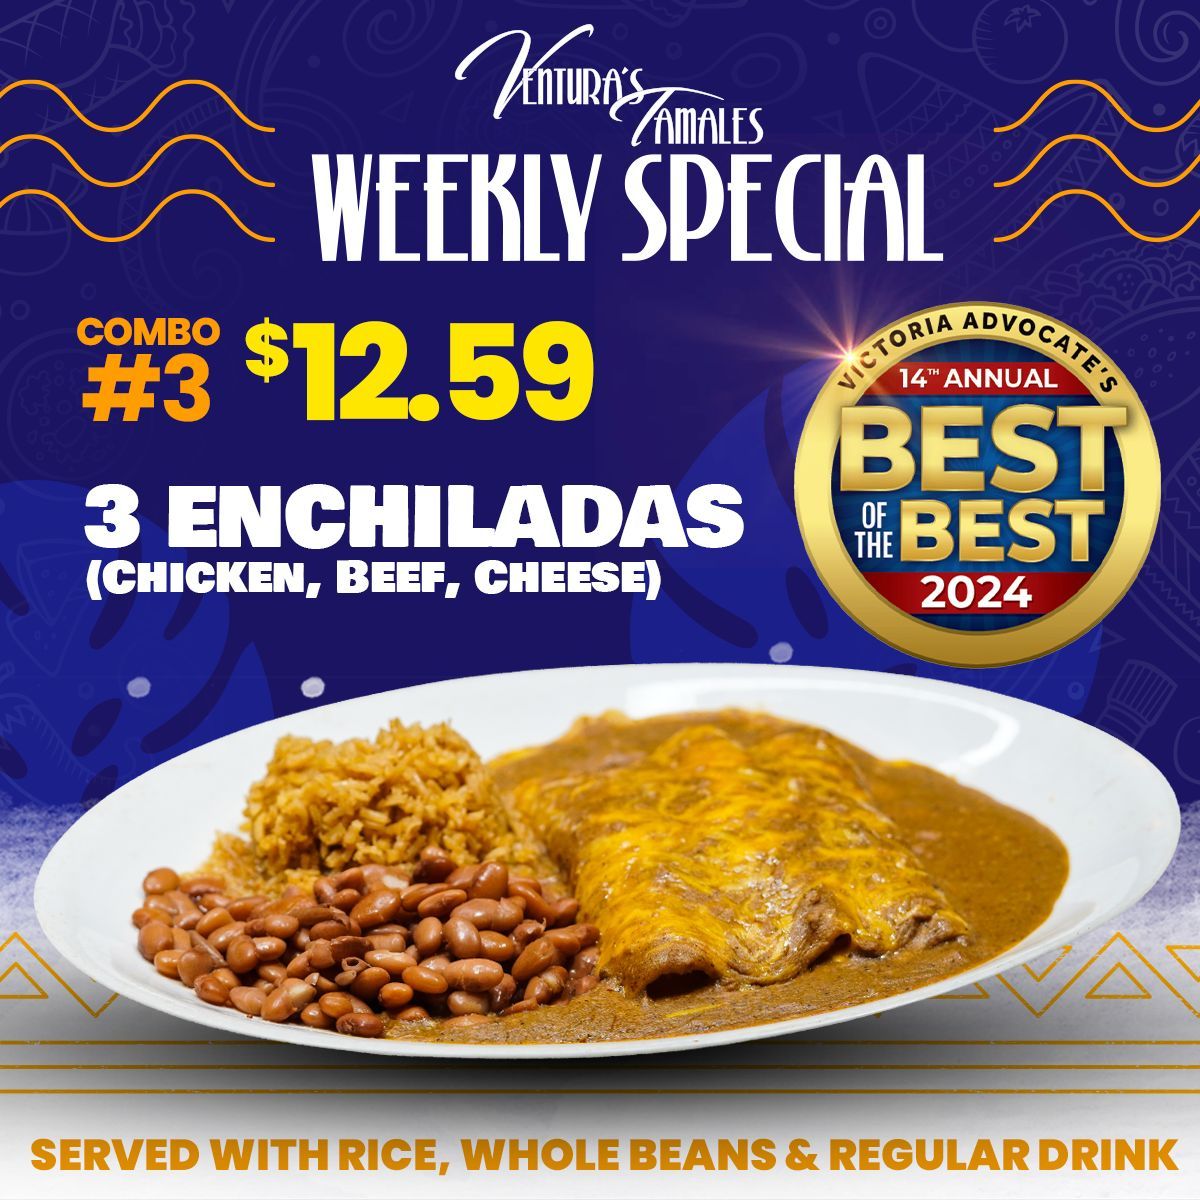 We're open for lunch and dinner—join us at Ventura's for the best Mexican food in the CROSSROADS! 

#VenturasTamales #BestoftheBest #MexicanFood #VictoriaTexas